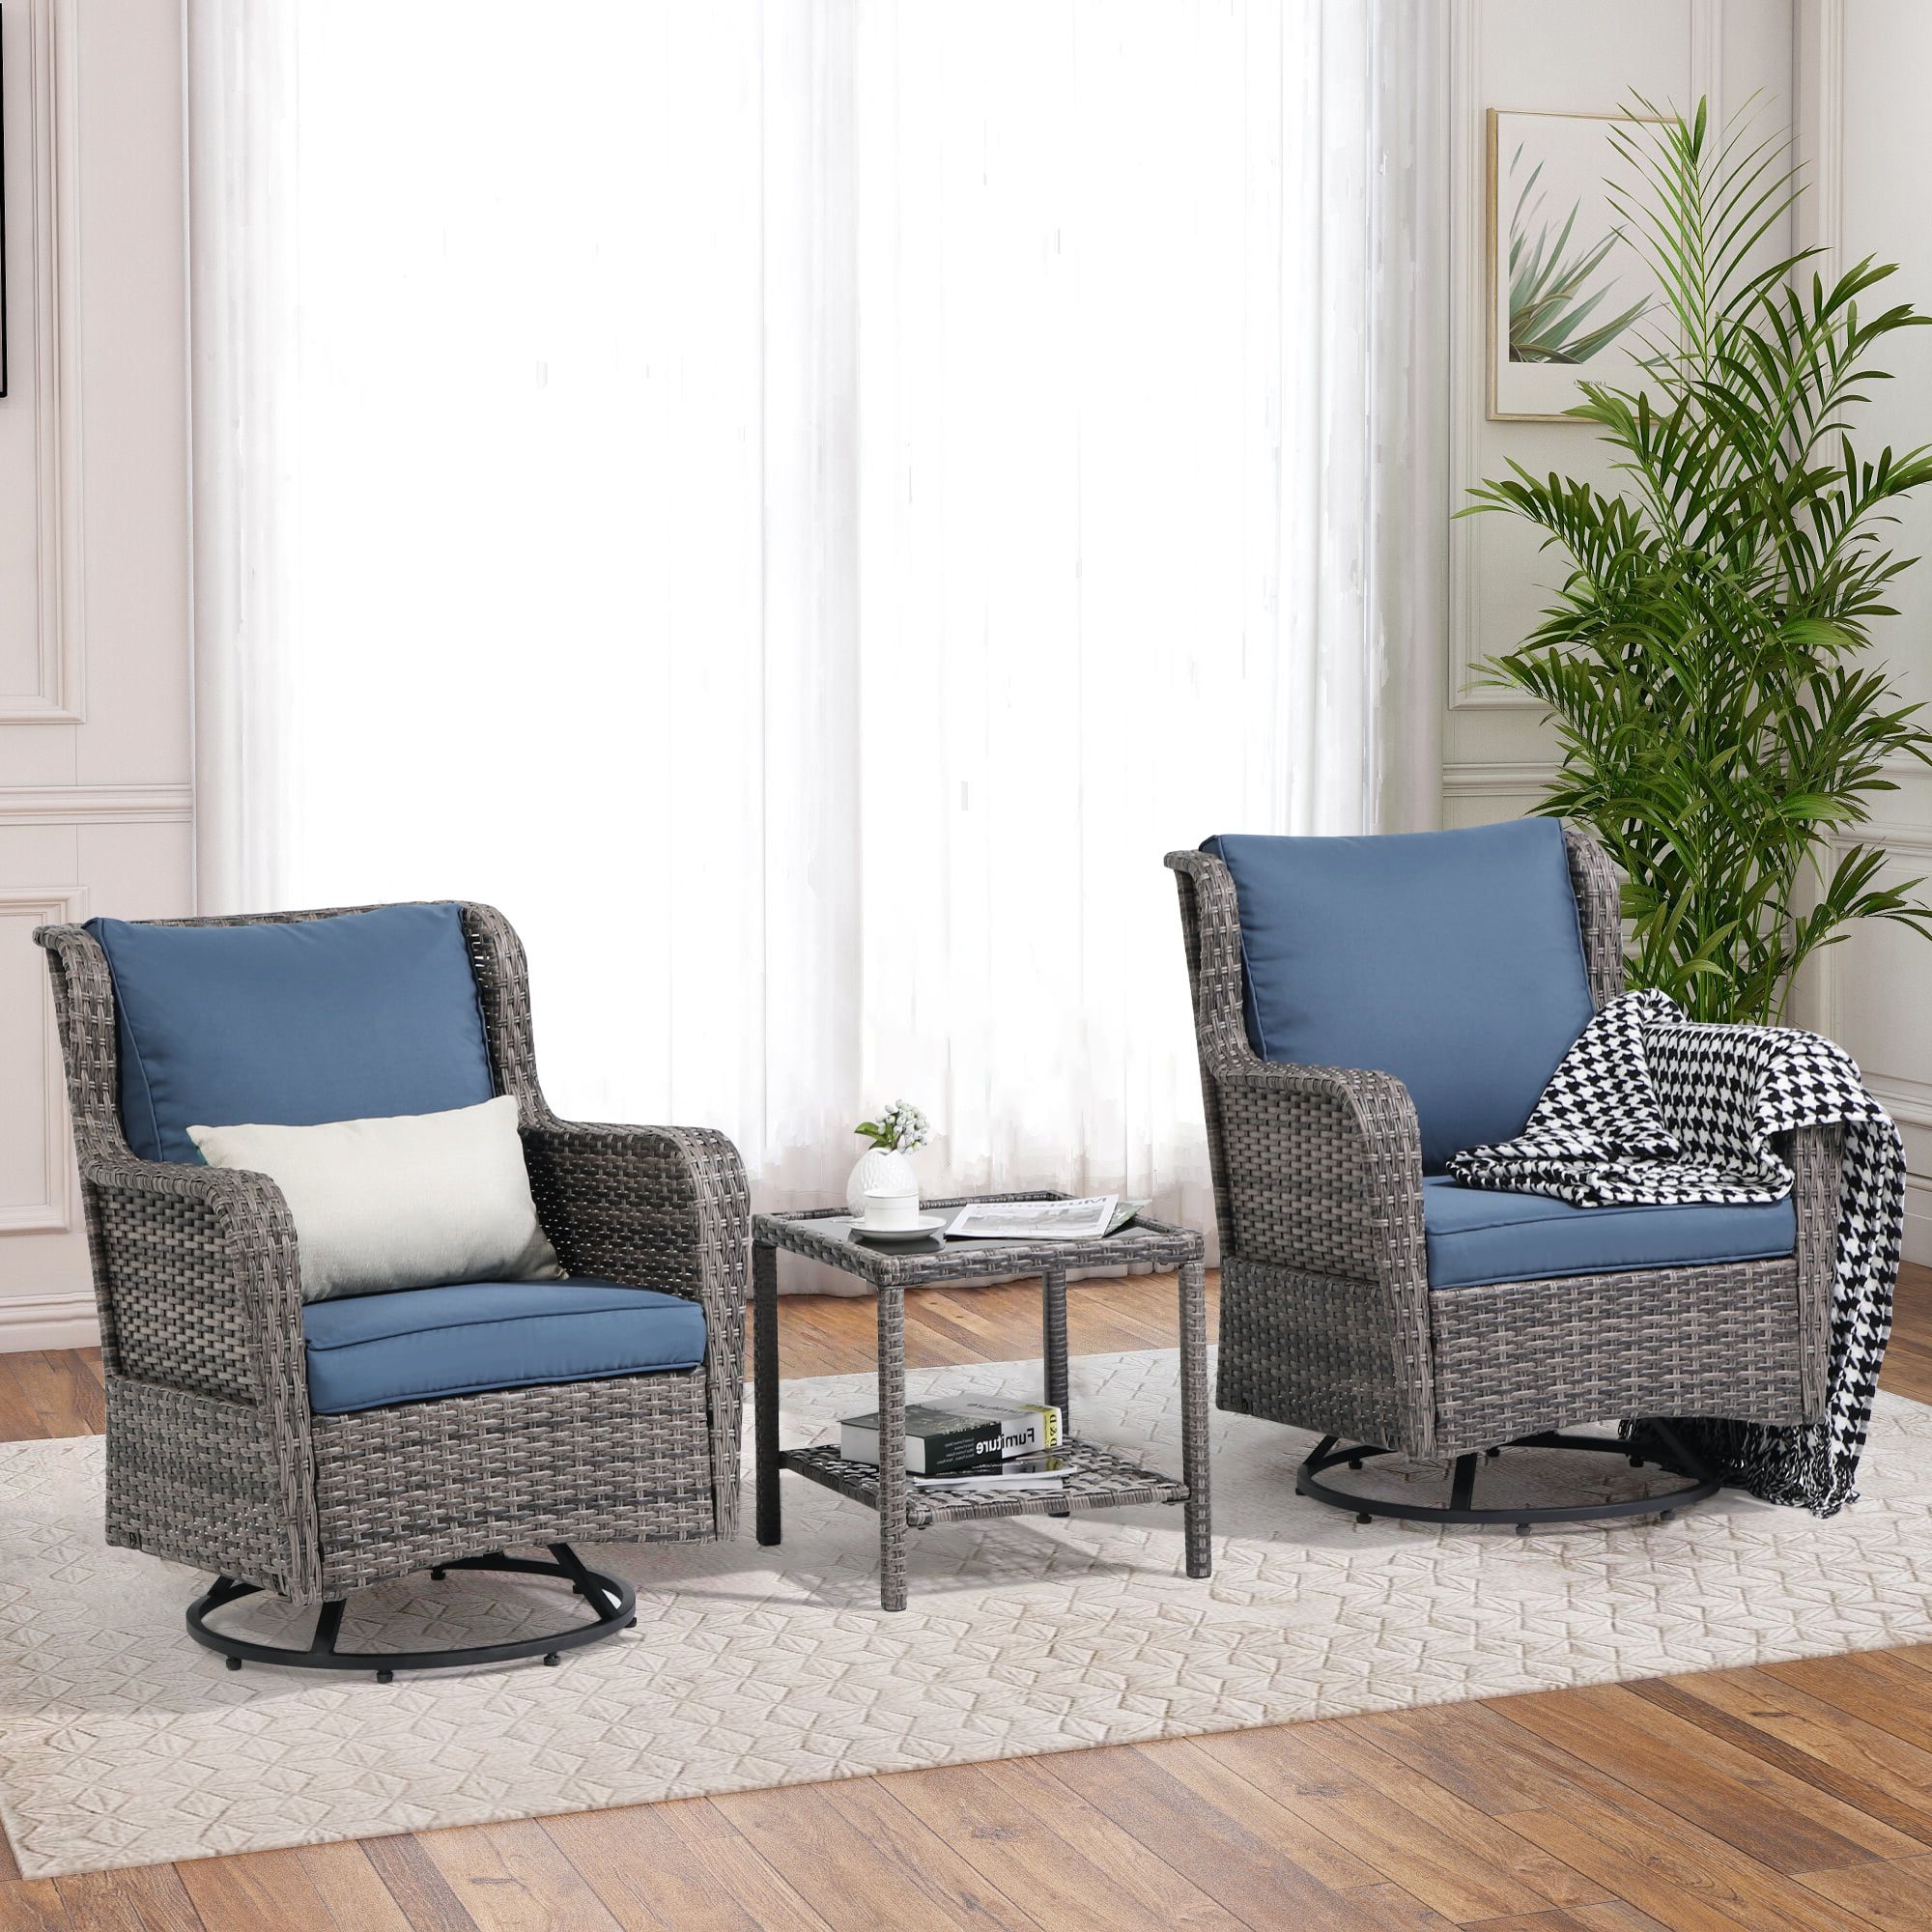 Joivi Patio Swivel Rocker Set, Outdoor Wicker Swivel Rocking Chairs With  Side Table, 3 Pieces All Weather Rattan Furniture Bistro Set With Thick  Cushions, Iron Frame, Navy Blue – Walmart Regarding Most Recent 3 Pieces Outdoor Patio Swivel Rocker Set (View 15 of 15)